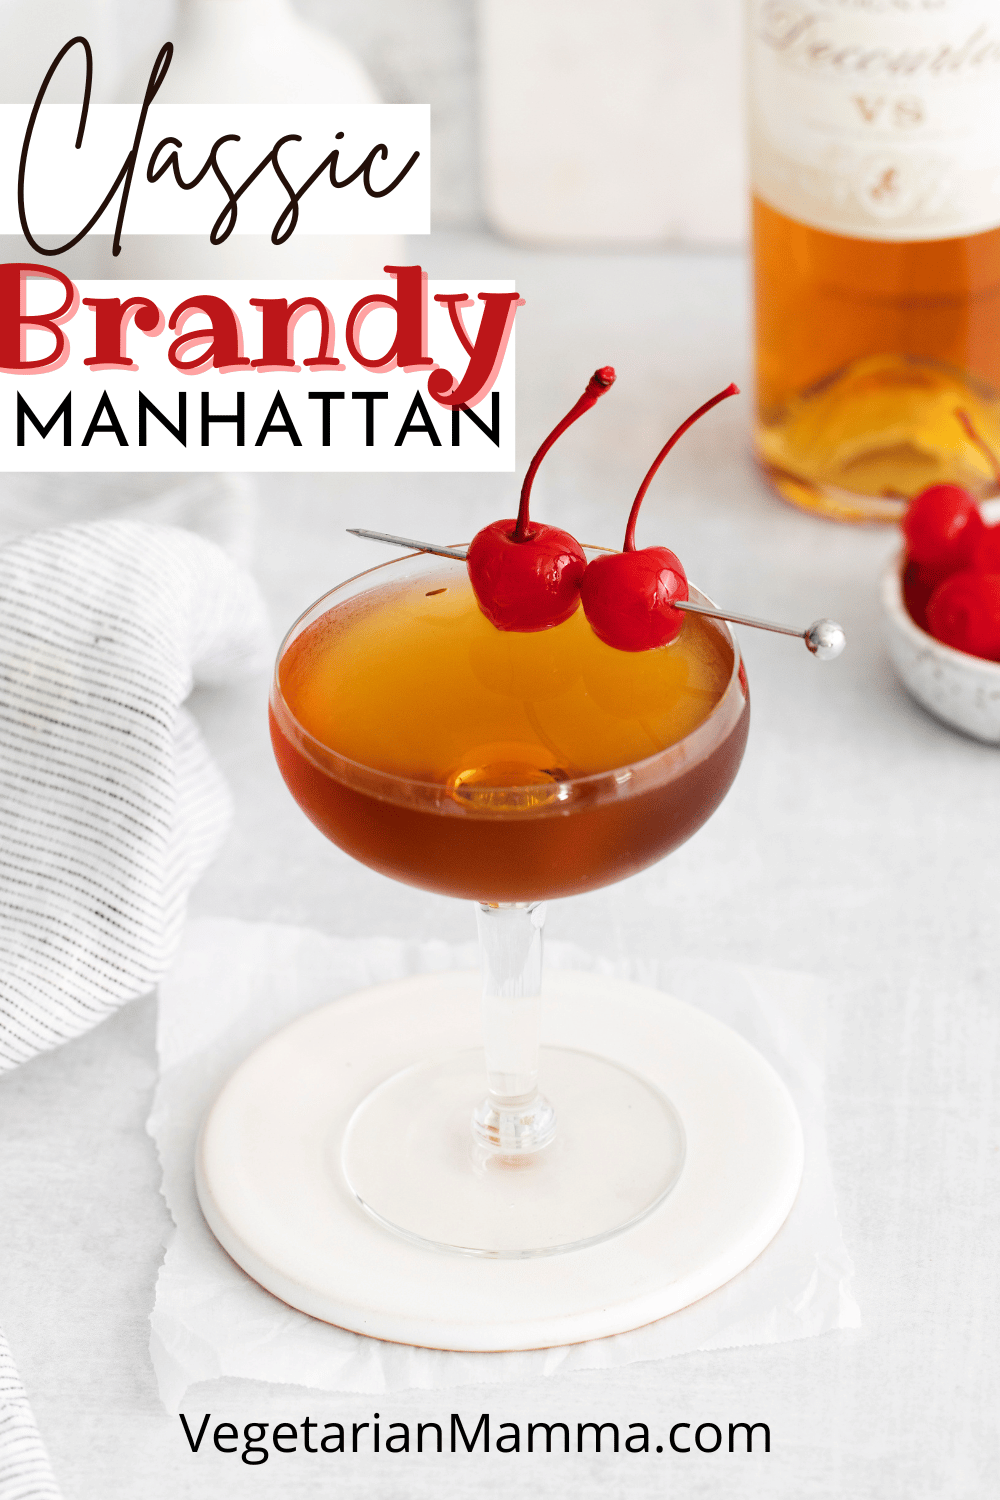 We’re switching up a classic manhattan and adding a bit of sweetness by using brandy instead of whiskey. This Brandy Manhattan cocktail has a complex flavor with a hint of fruitiness from the vermouth and herbaceousness from the bitters.